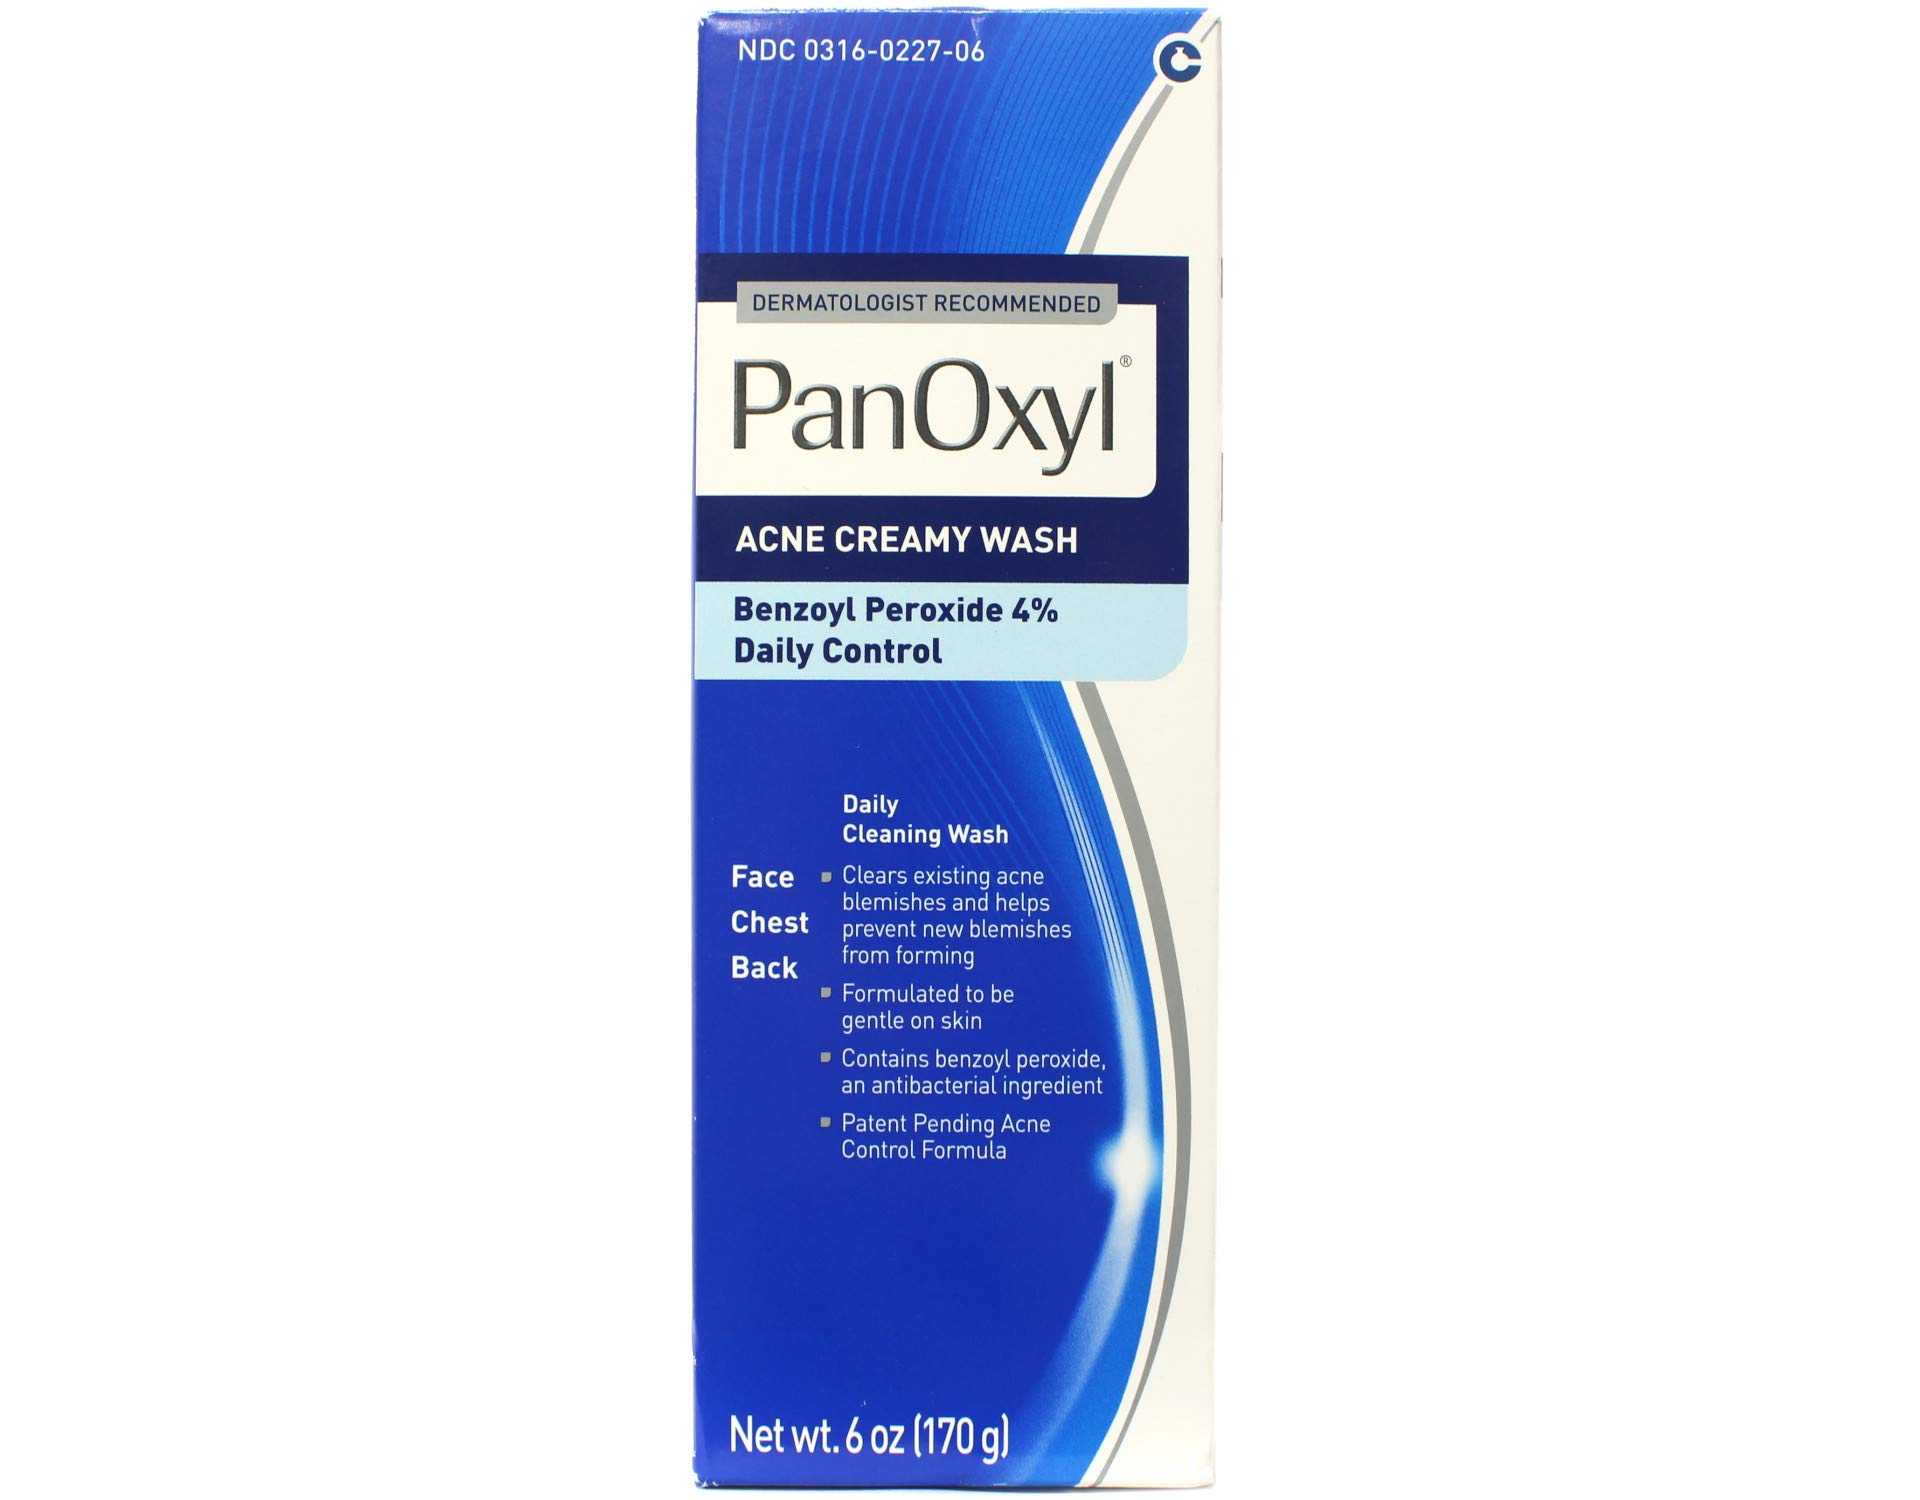 PanOxyl Creamy Wash 4% Benzoyl Peroxide Daily Control Deep Cleaning Wash for Acne, 6 oz | CVS